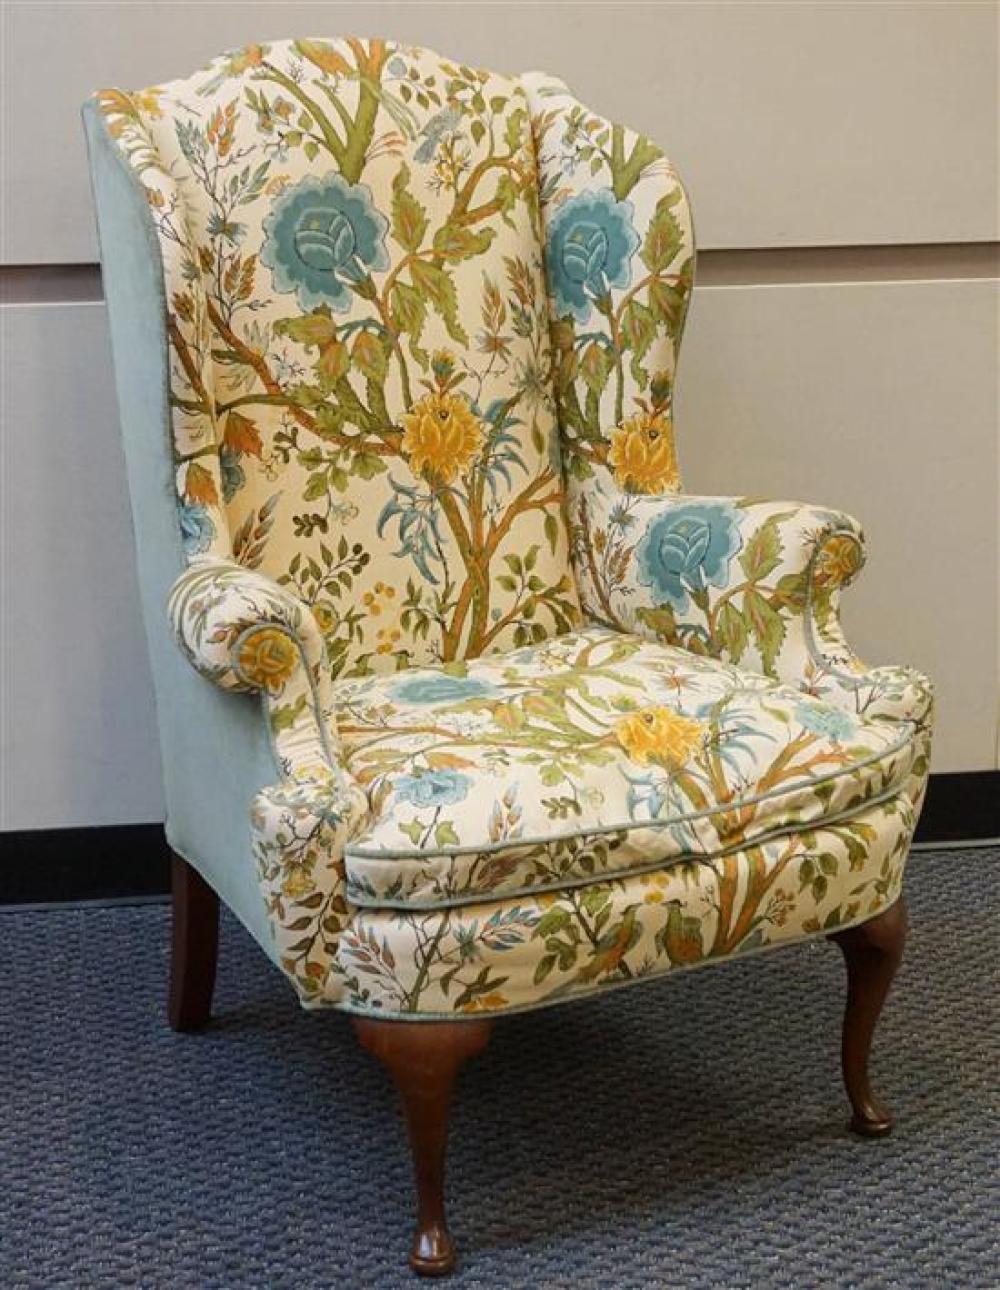 HENREDON QUEEN ANNE STYLE FLORAL UPHOLSTERED